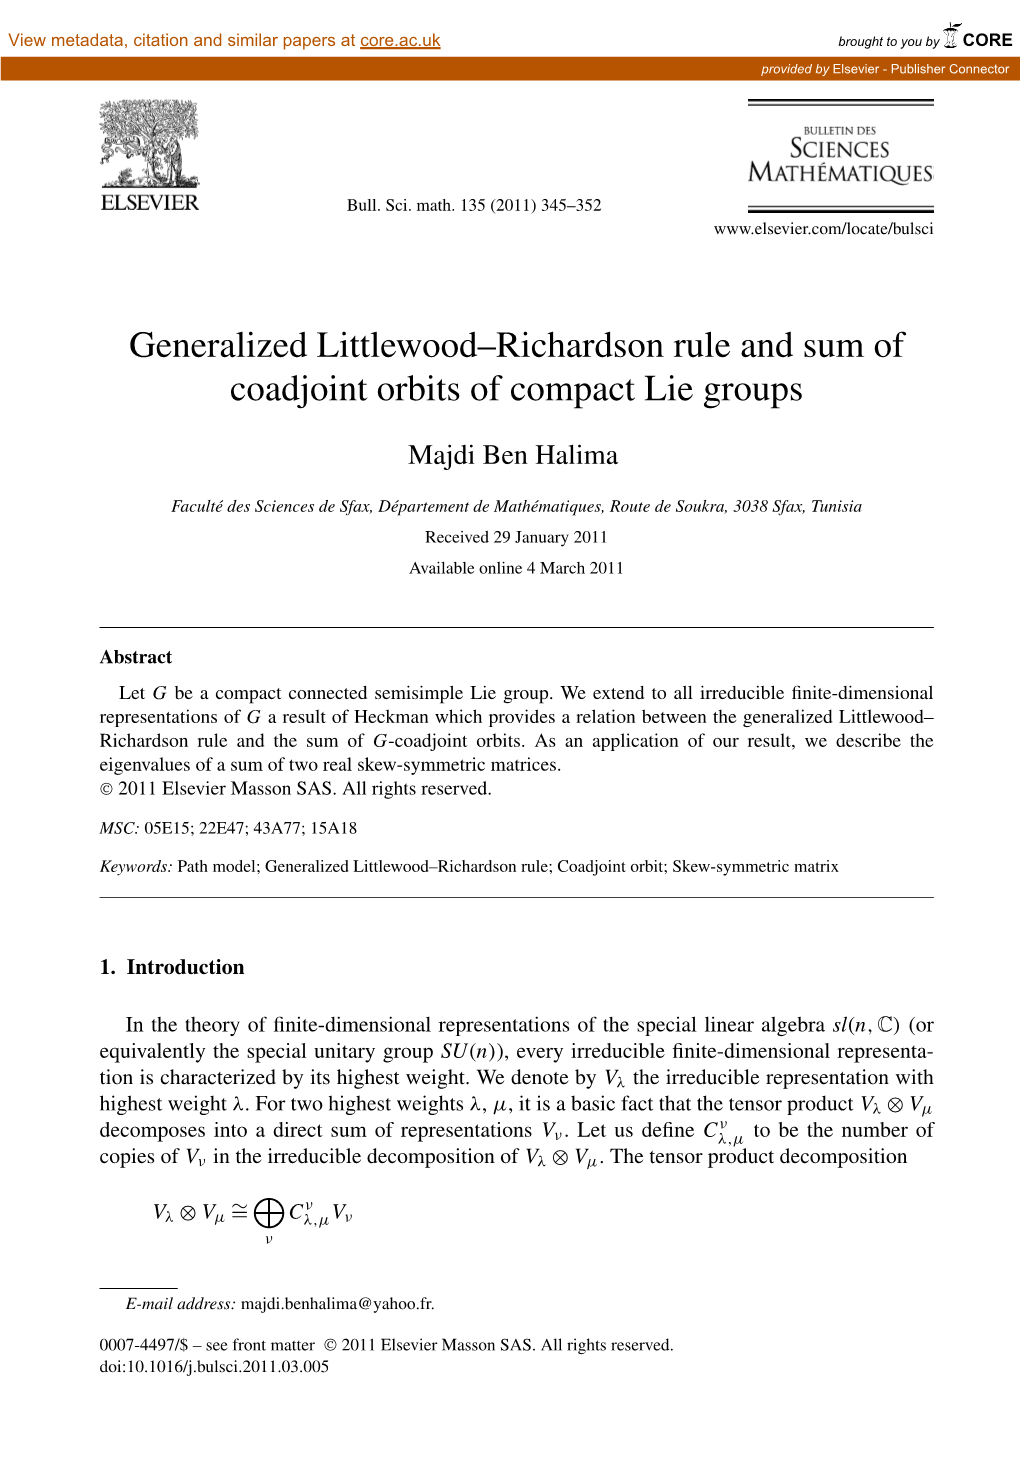 Generalized Littlewood–Richardson Rule and Sum of Coadjoint Orbits of Compact Lie Groups